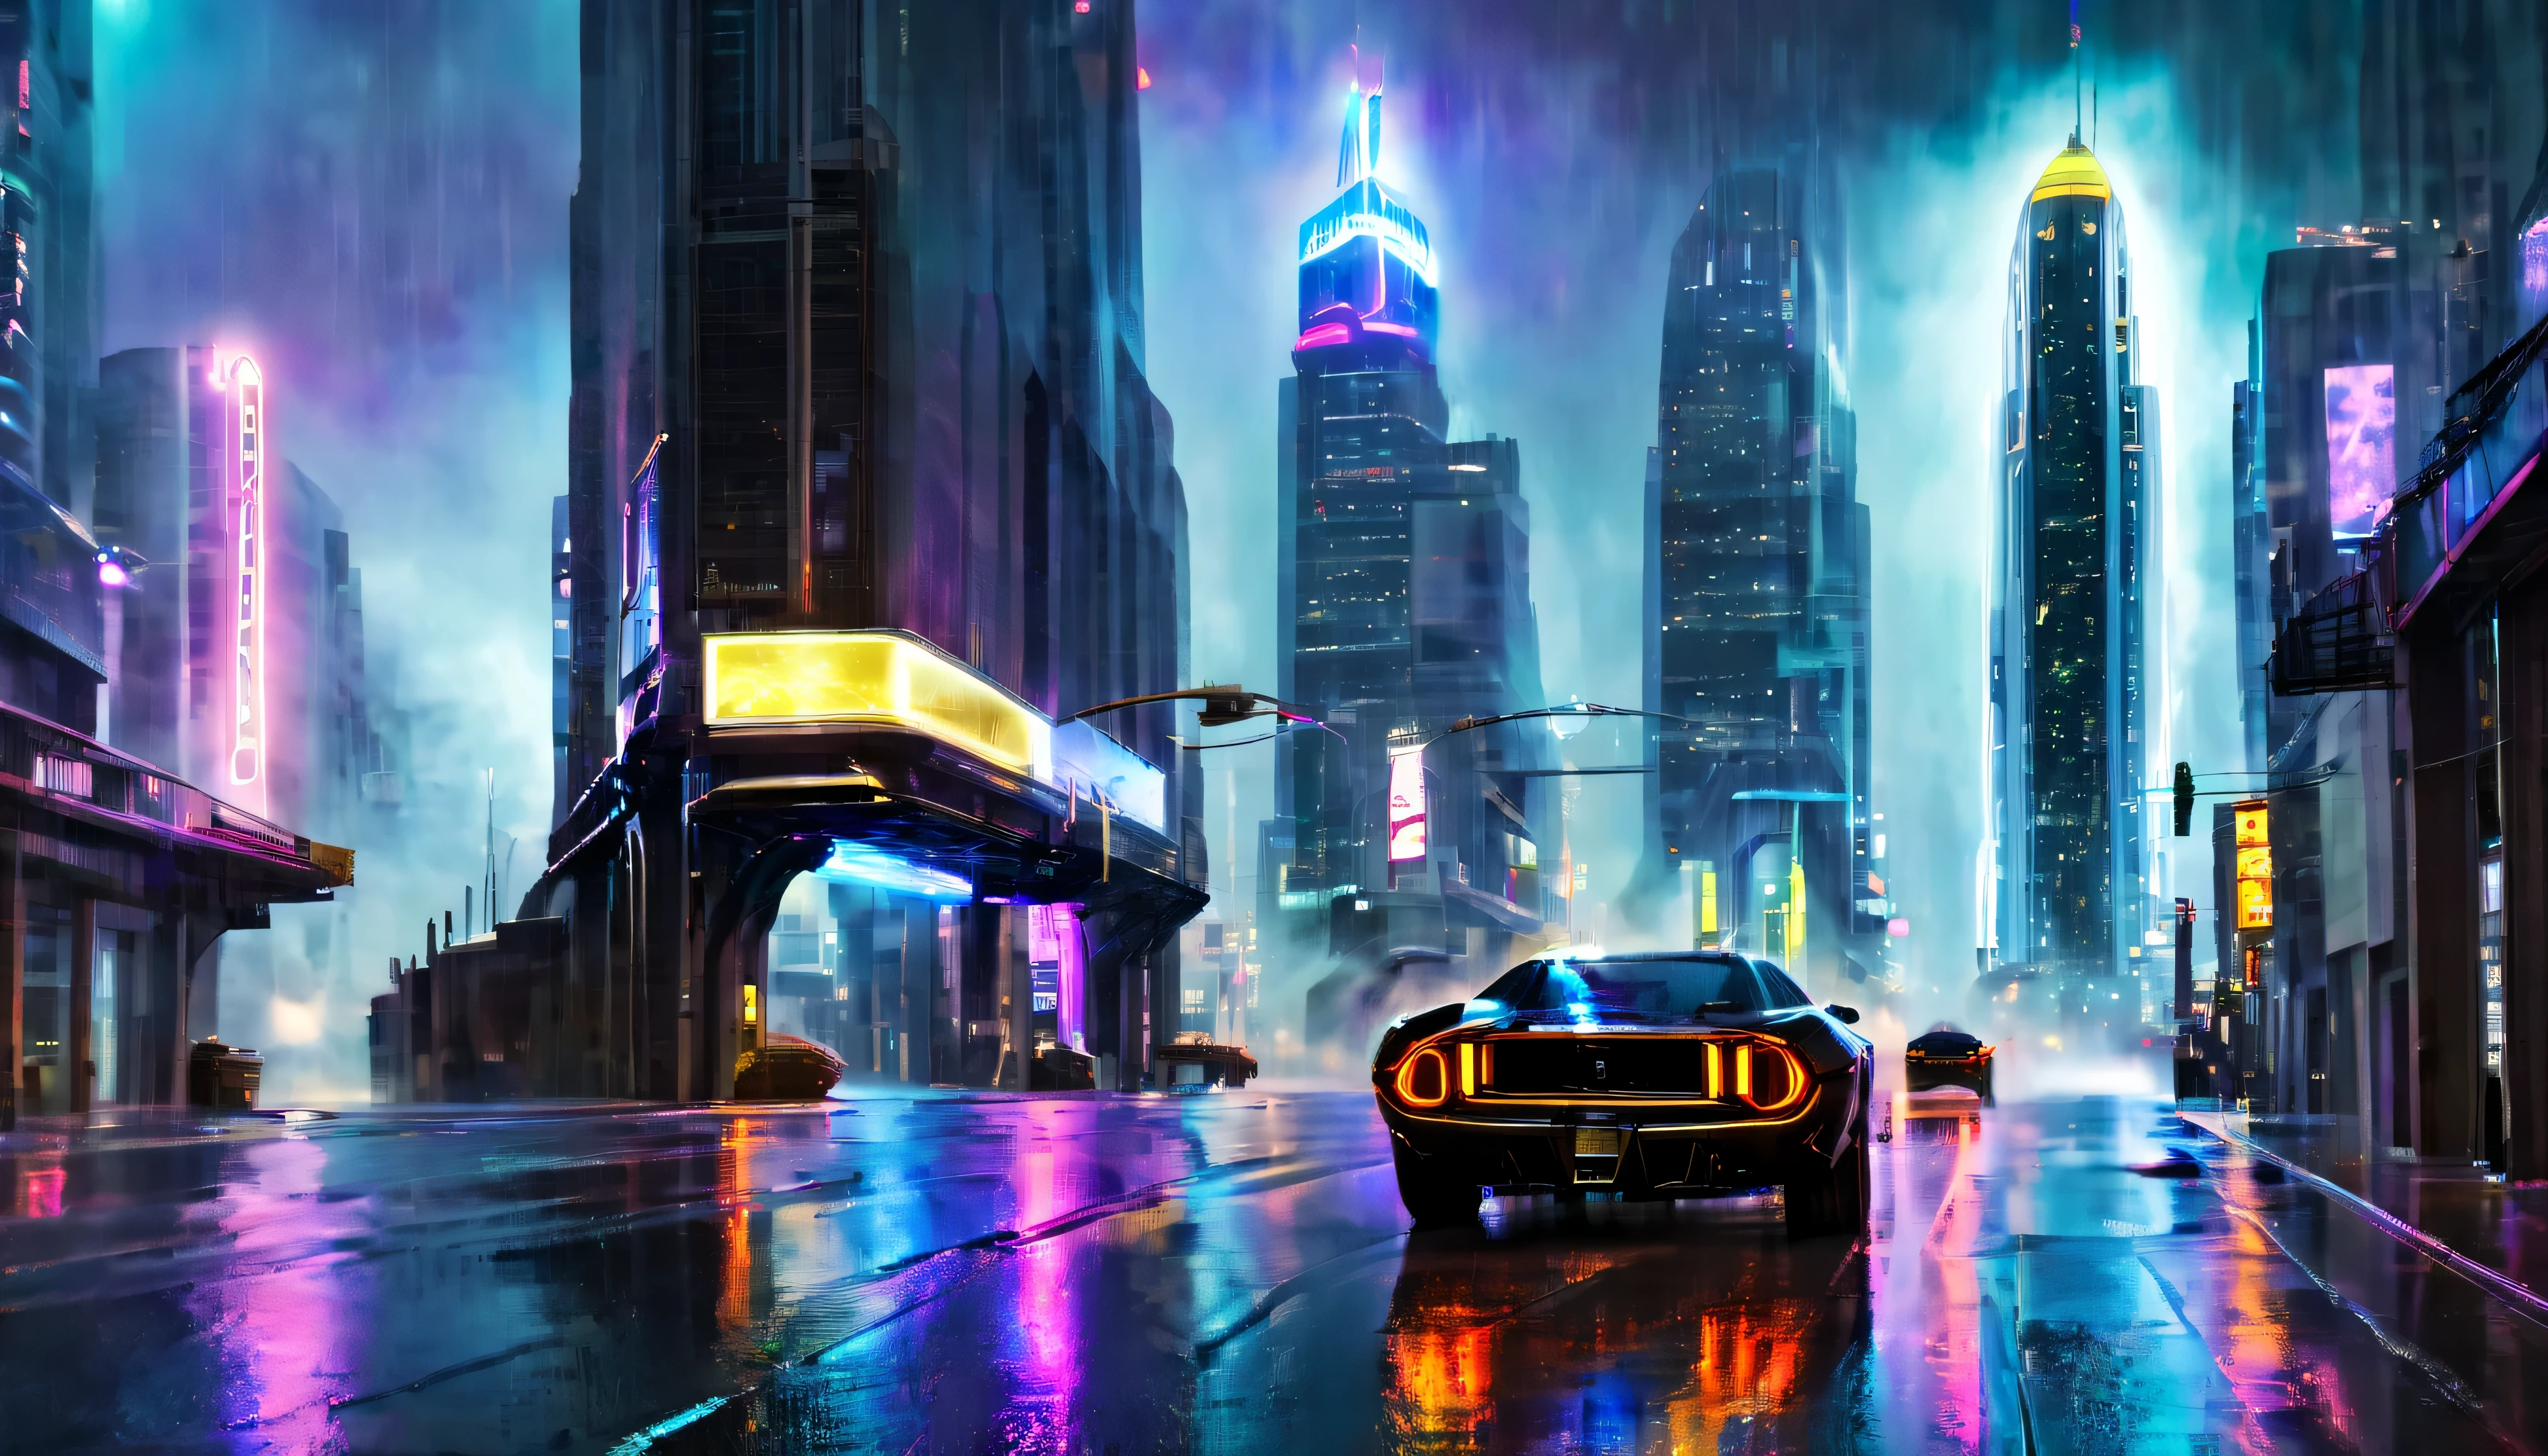 (best quality, highres, realistic, vivid colors), neon cityscape, futuristic city background, rain-soaked streets, bustling crowds, narrow alleyways, towering skyscrapers, futuristic vehicles, flying cars, night scene, city lights, steam rising from street grates, reflections in wet pavement.
